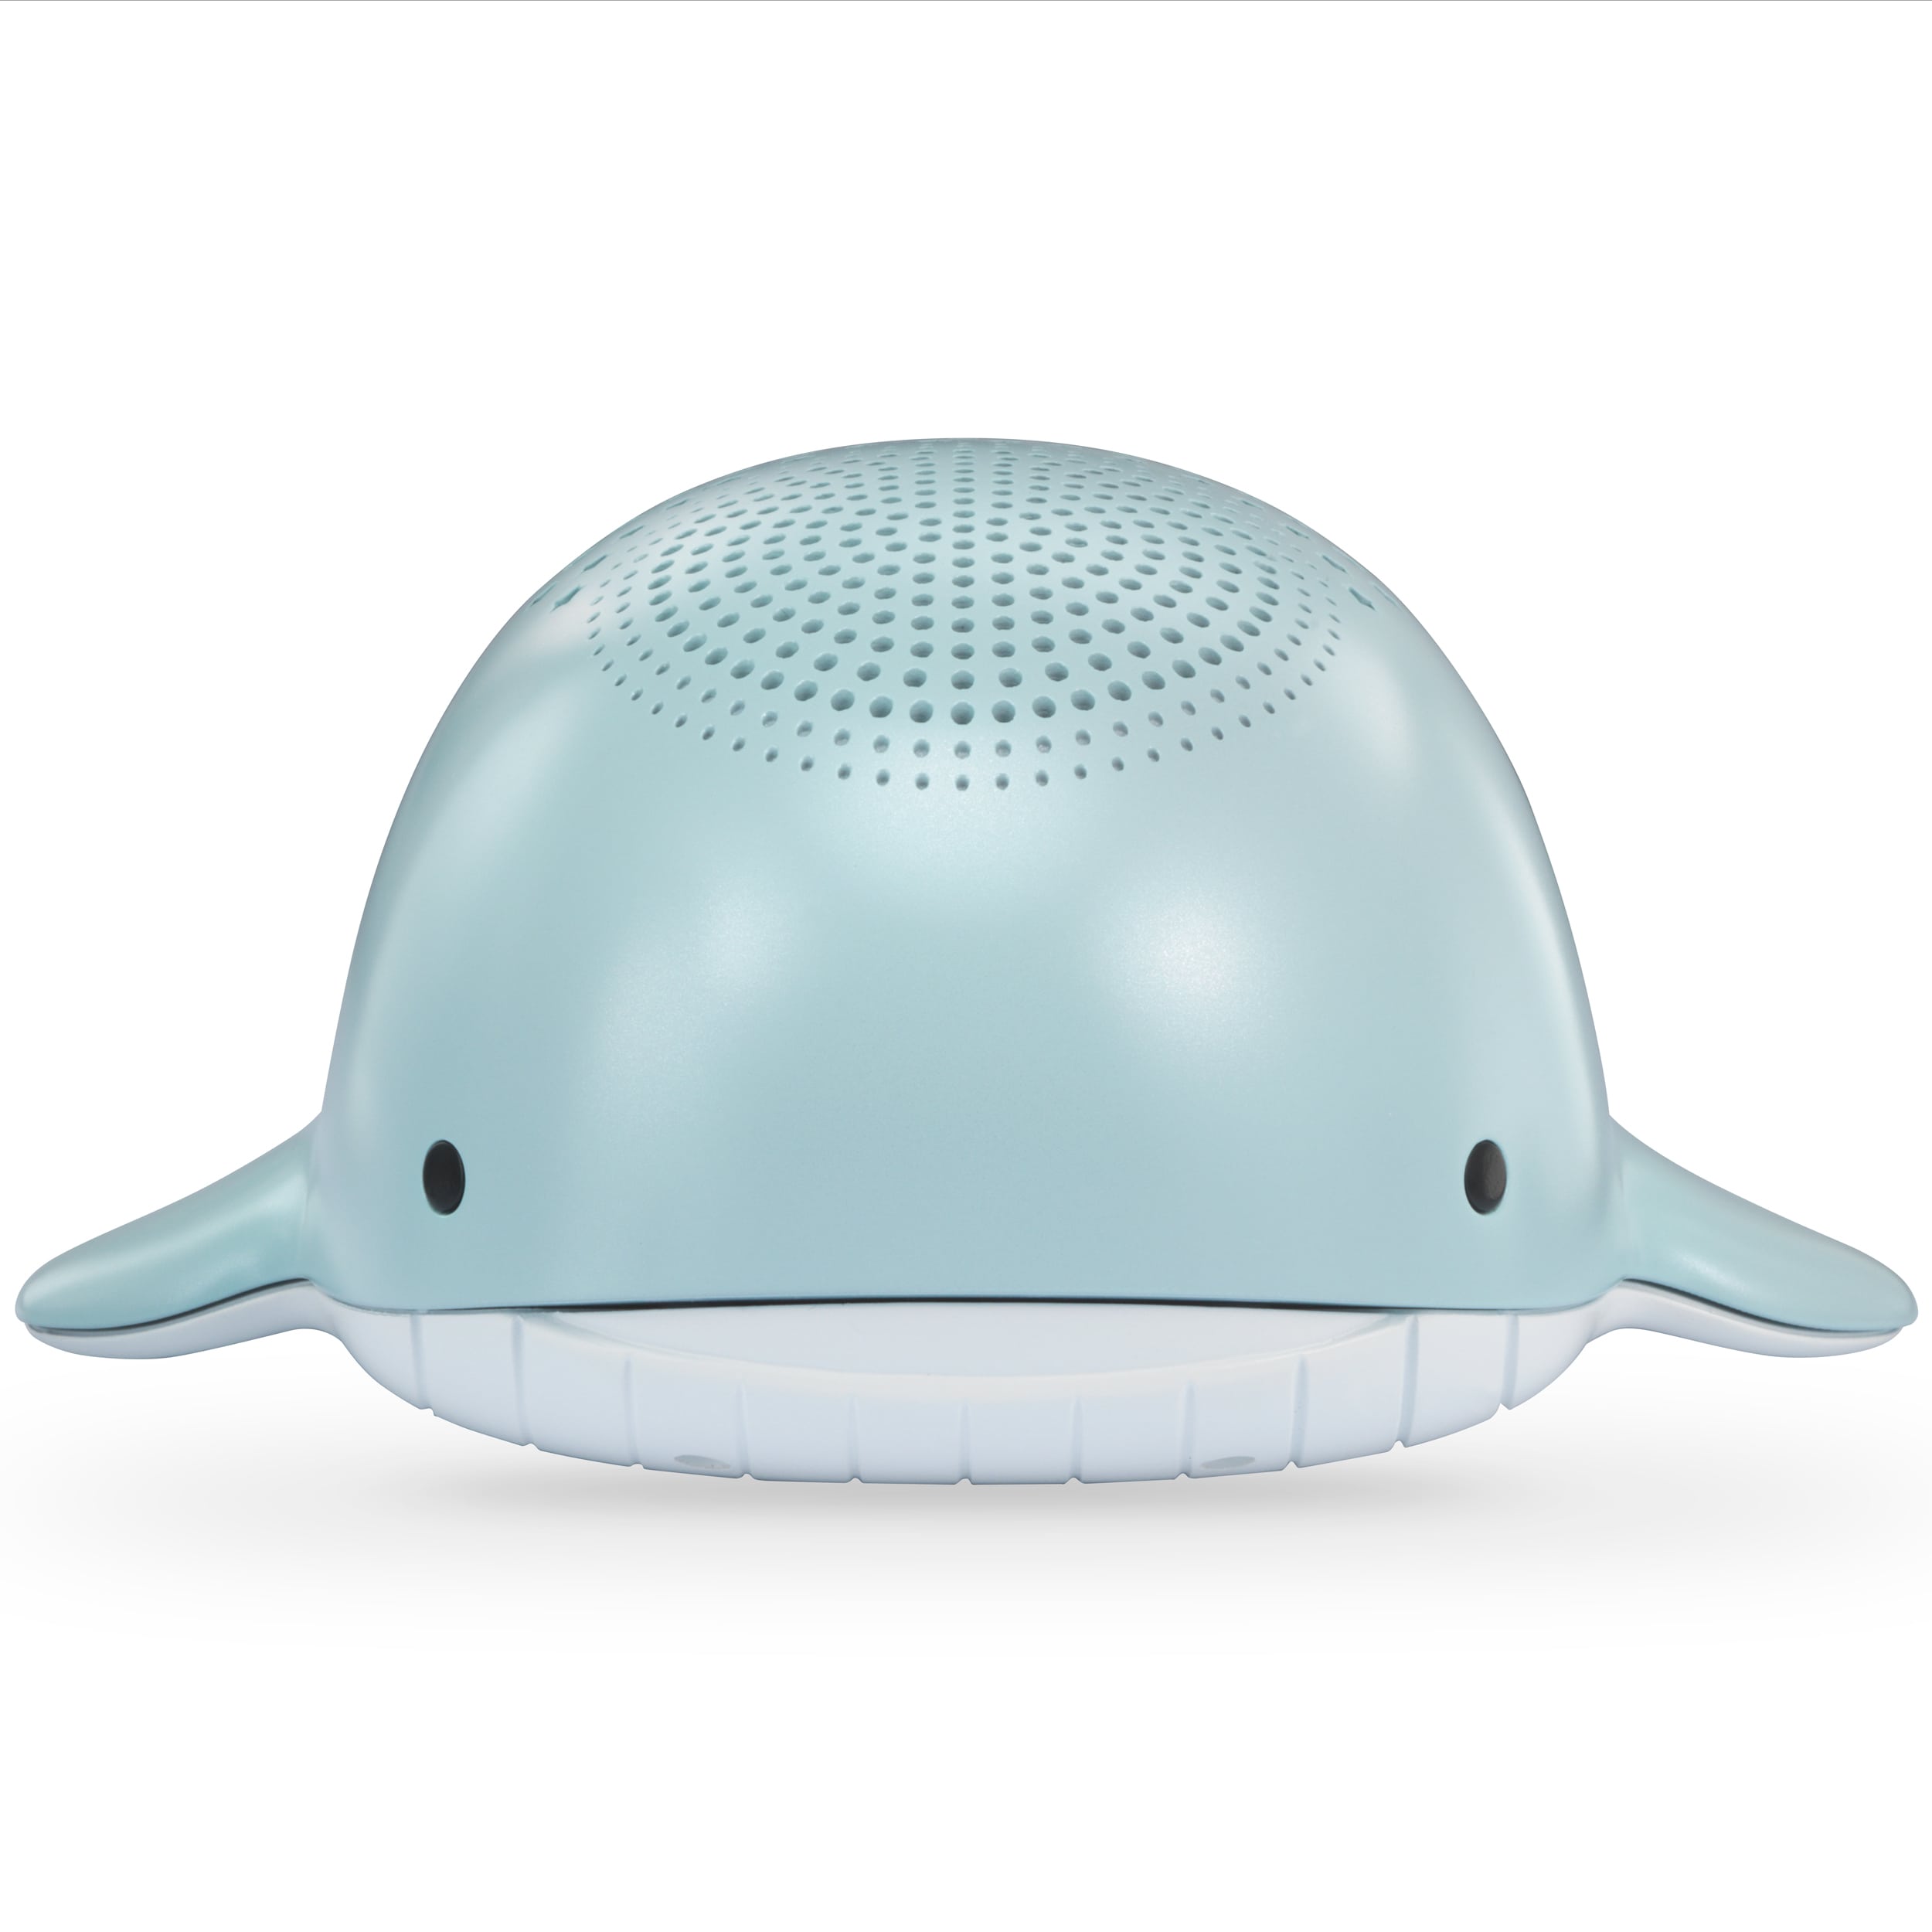 Wyatt the Whale® Storytelling Soother - view 12